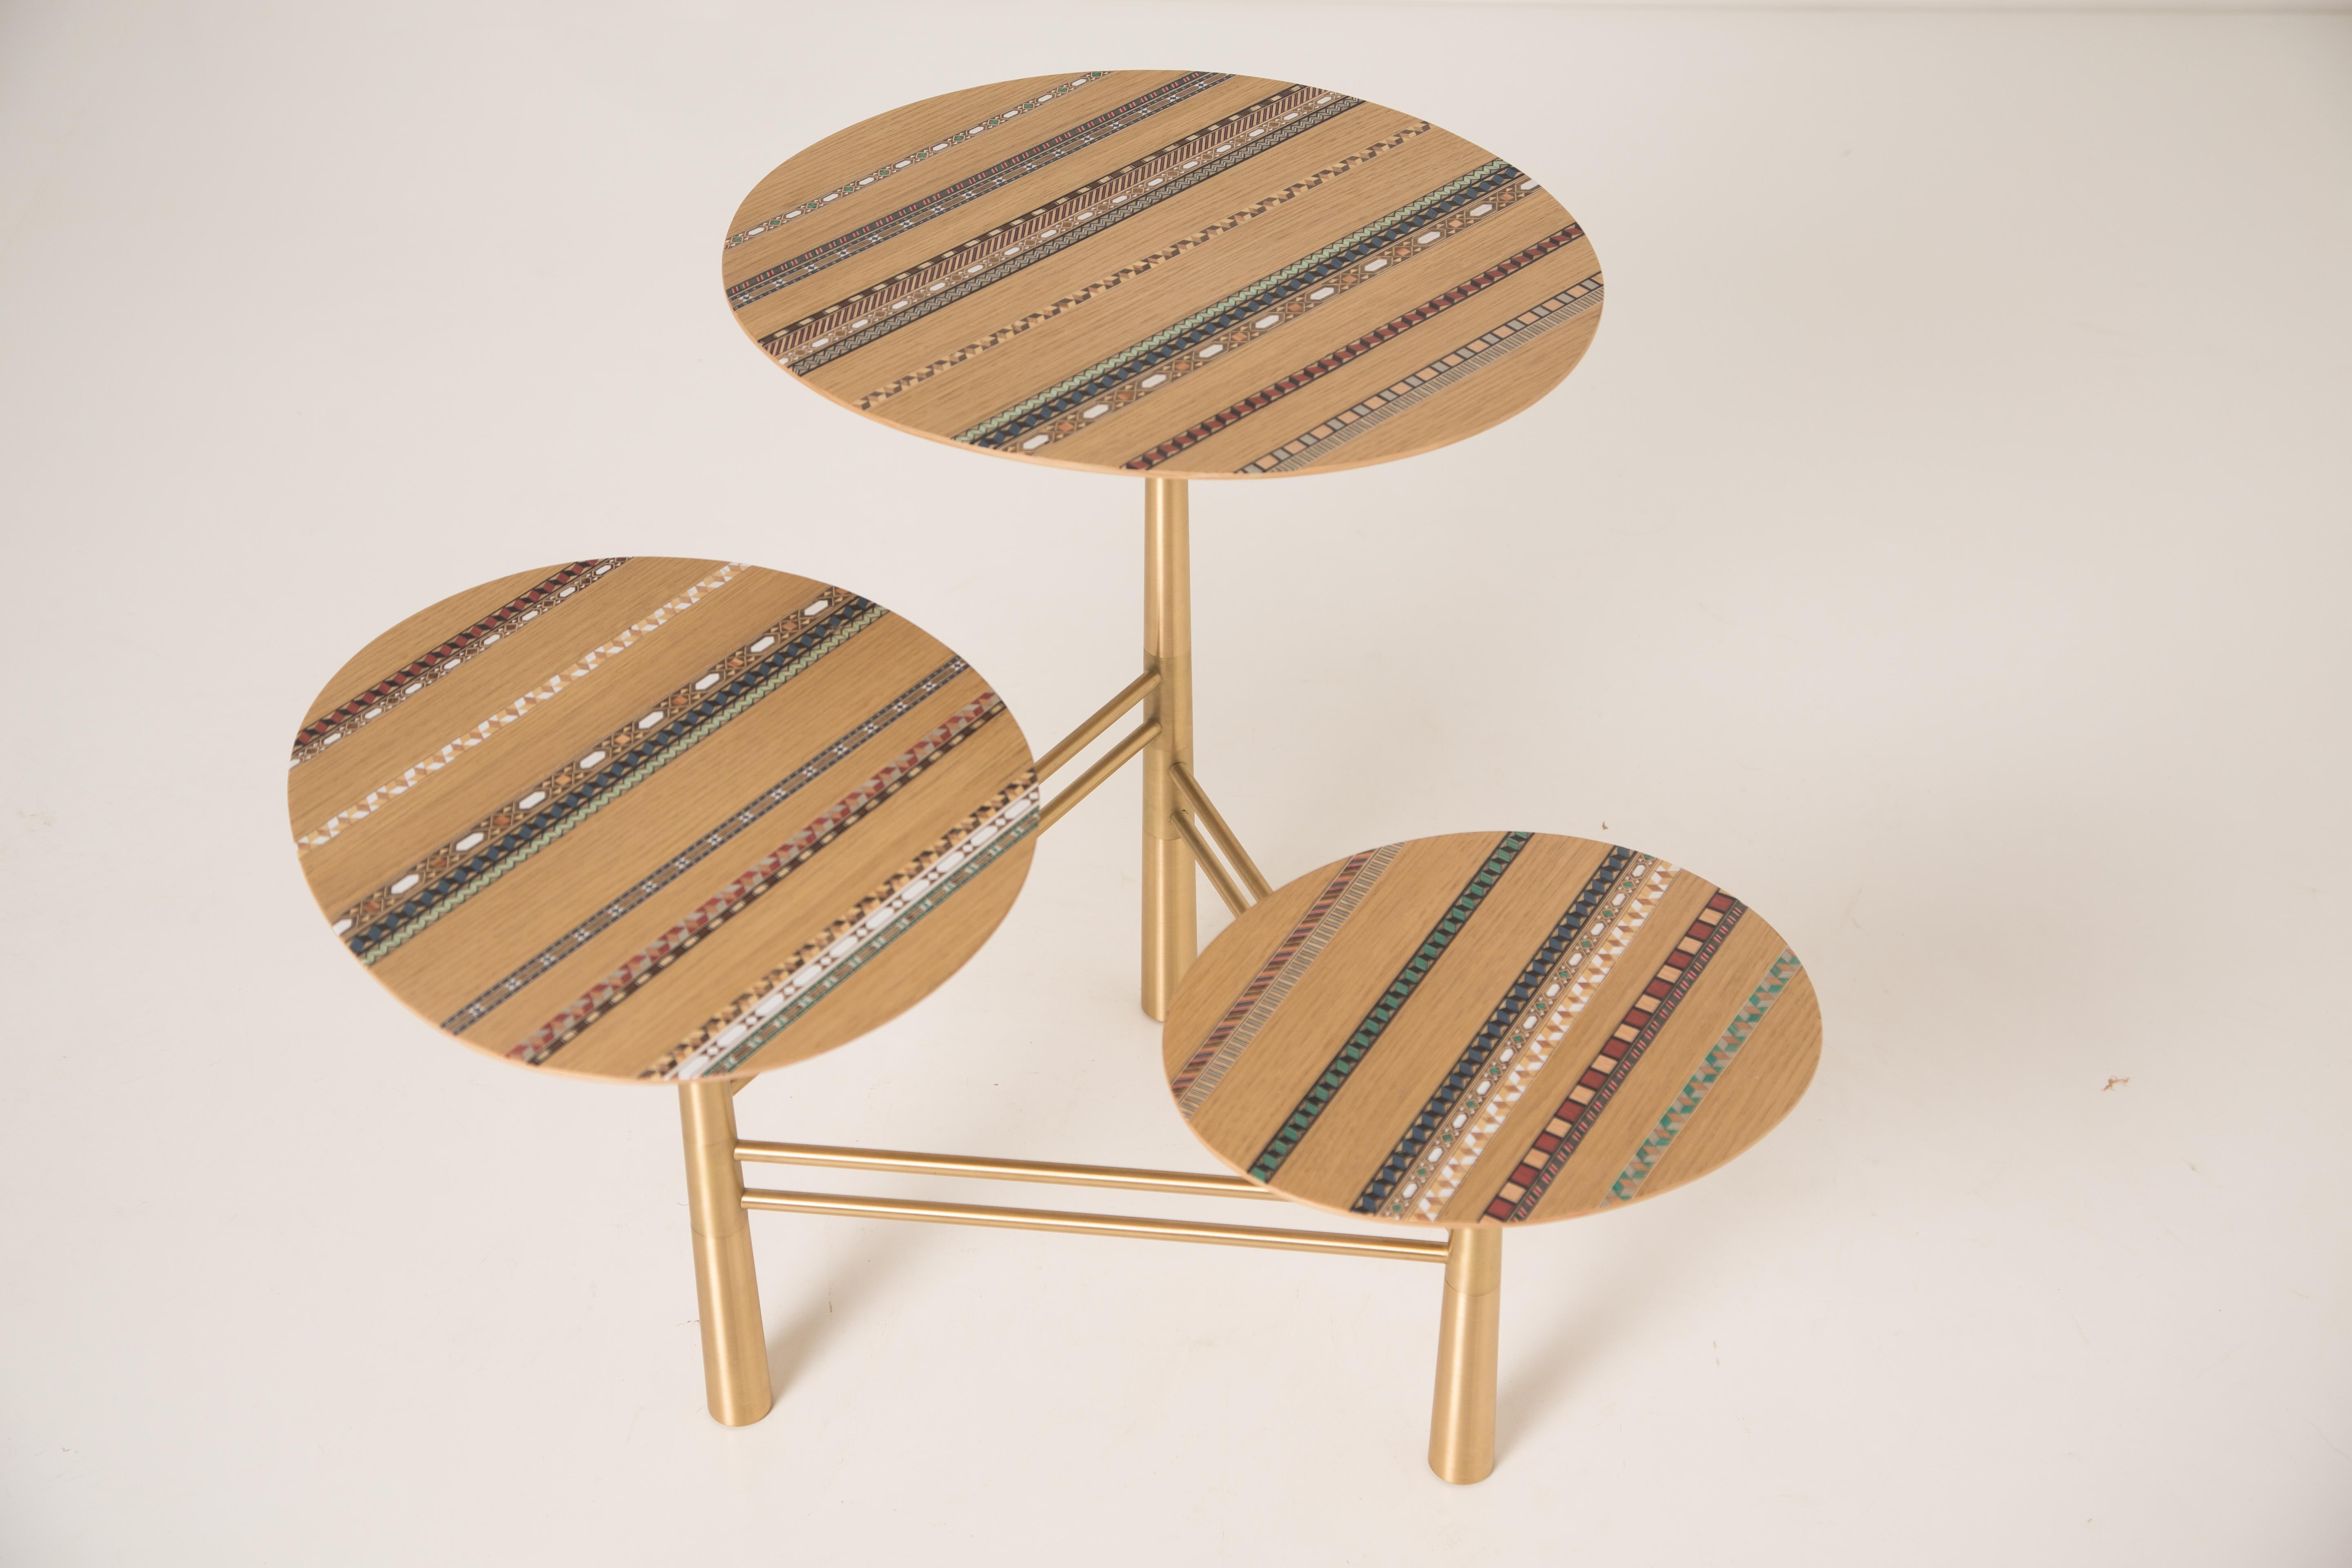 Lebanese Funquetry Pebble Table with traditional Middle Eastern marquetry patterns For Sale